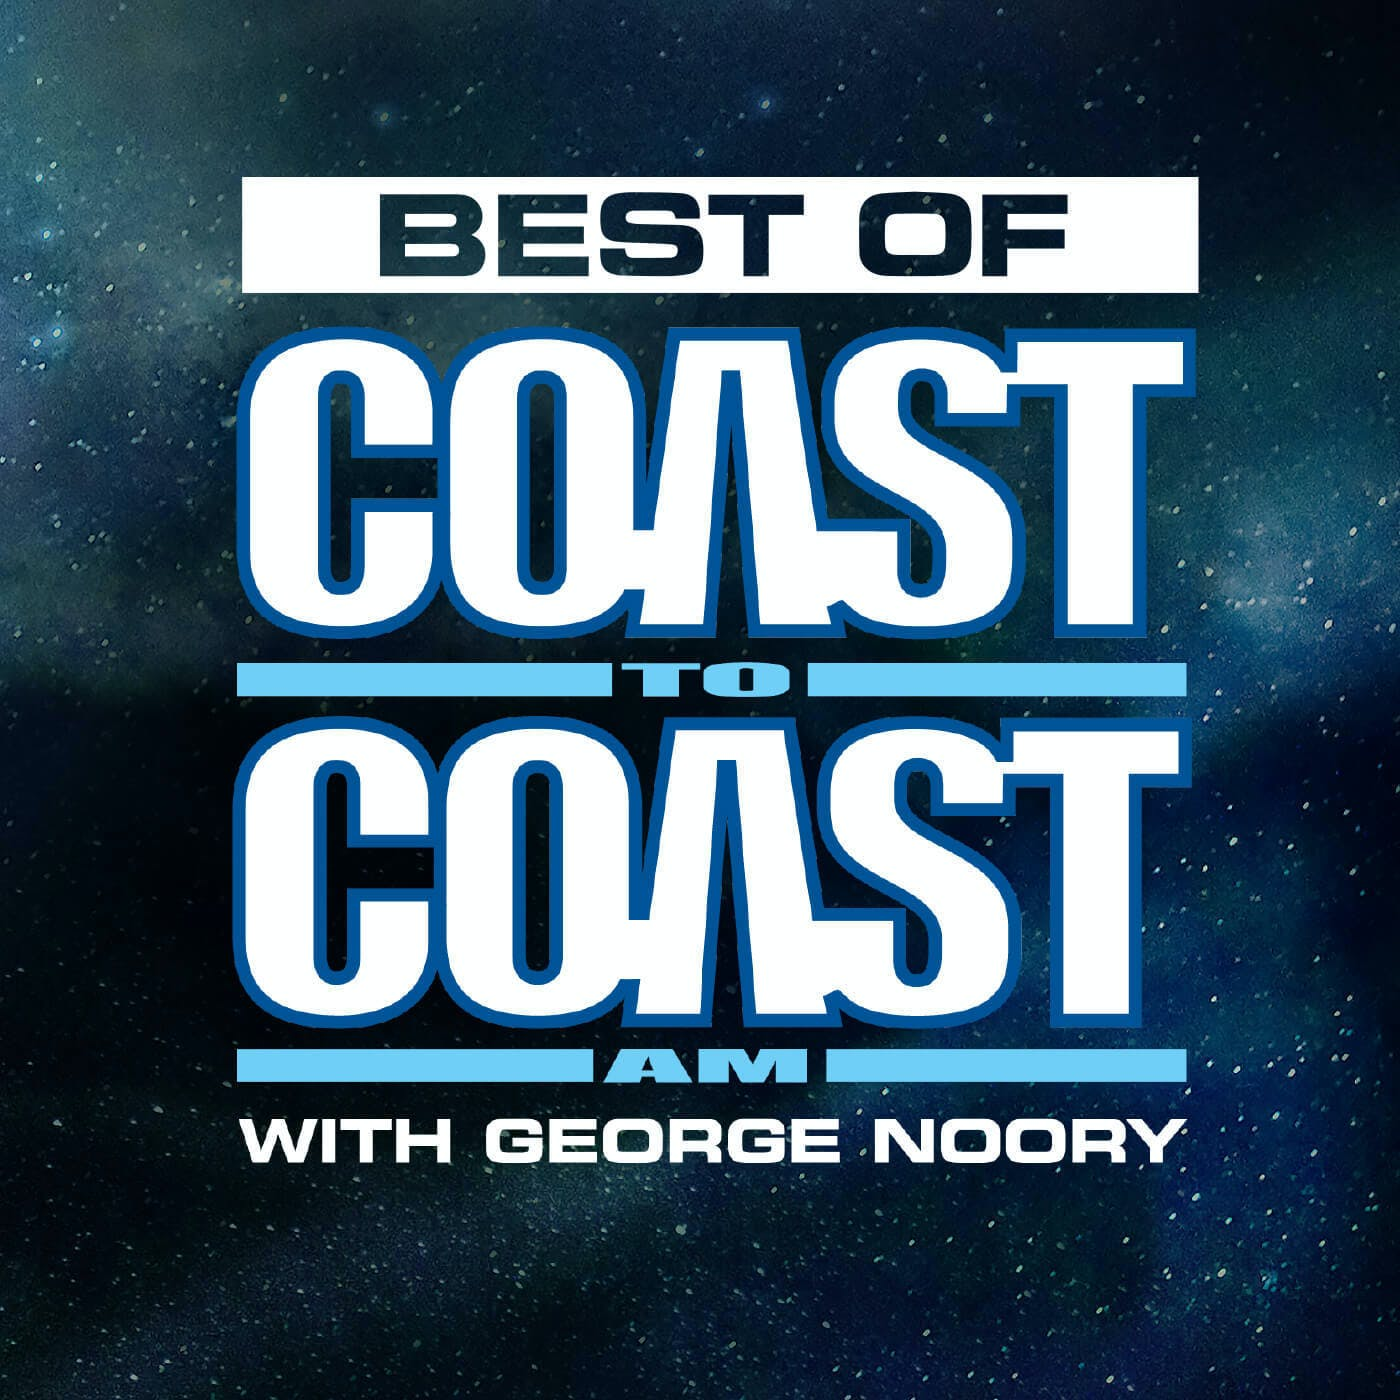 UFO Coverups and Roswell - Best of Coast to Coast AM - 8/22/17